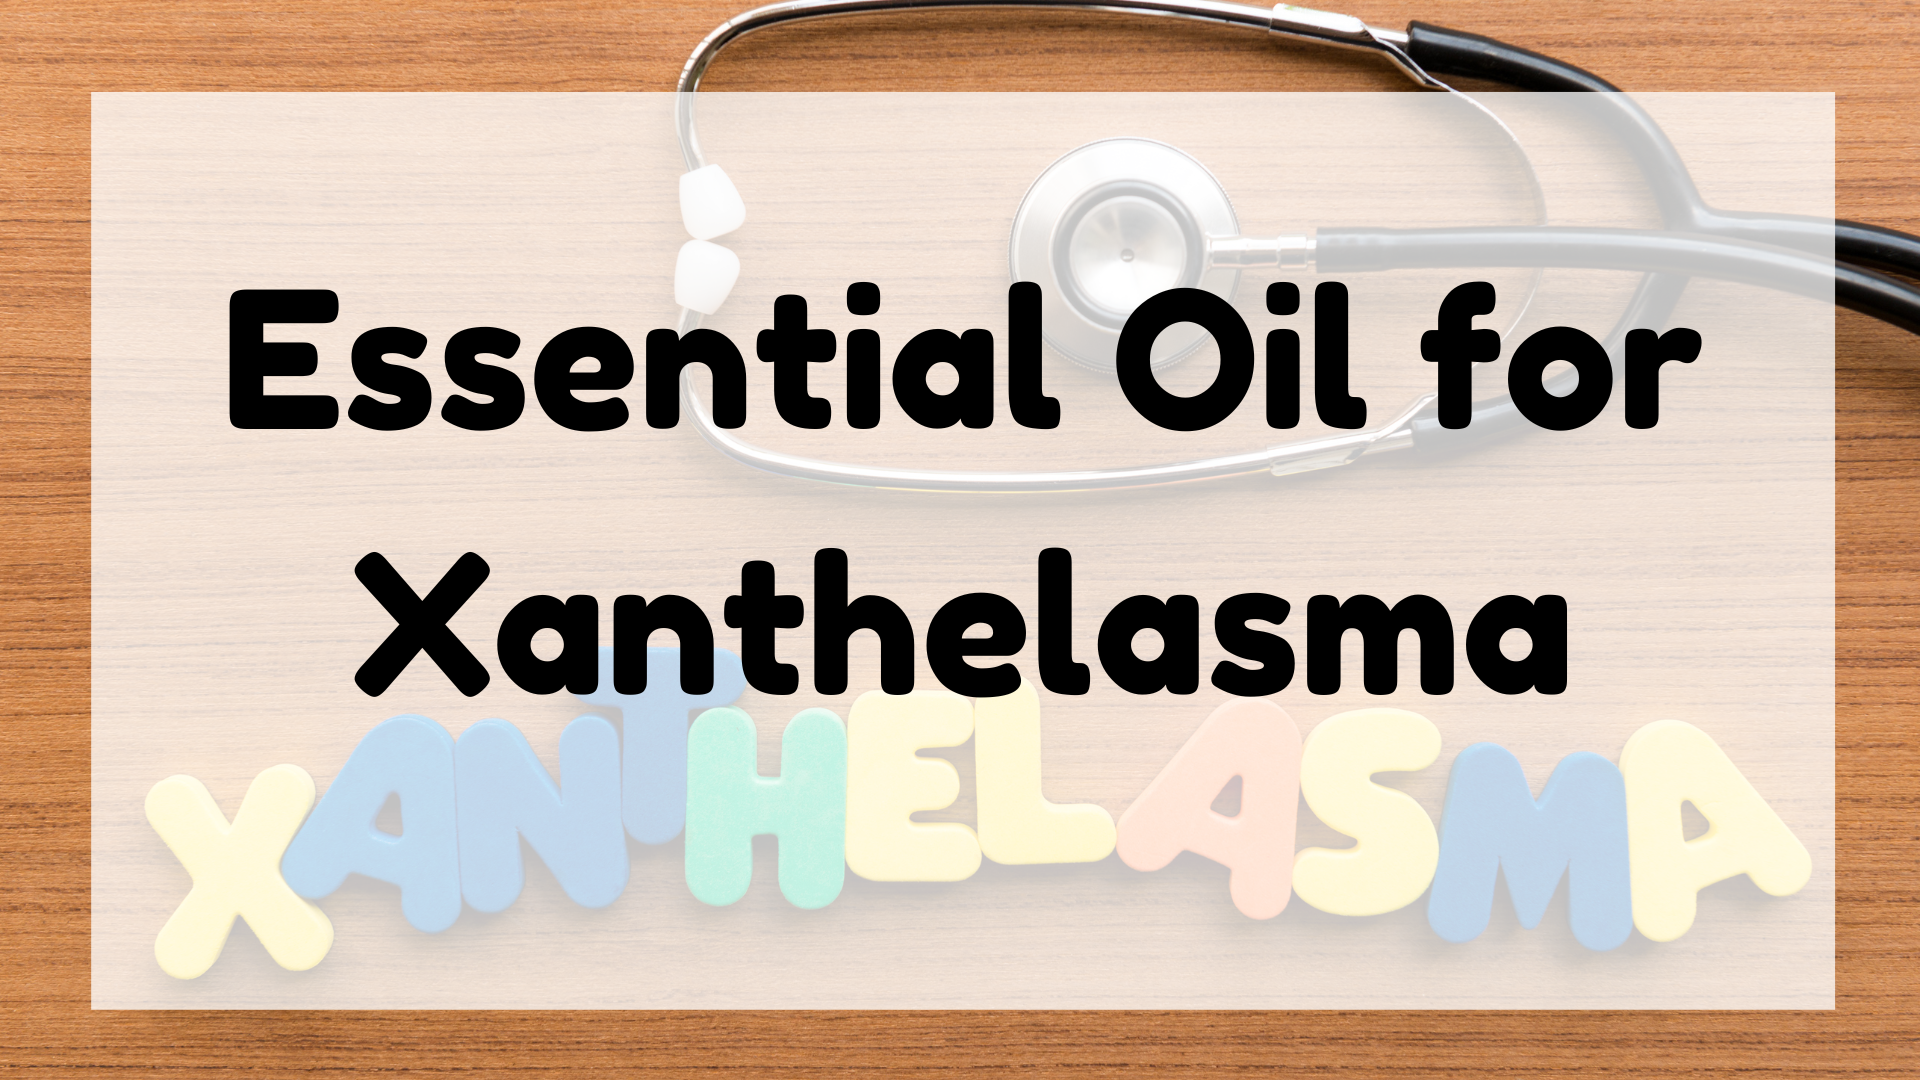 Essential Oil for Xanthelasma featured image